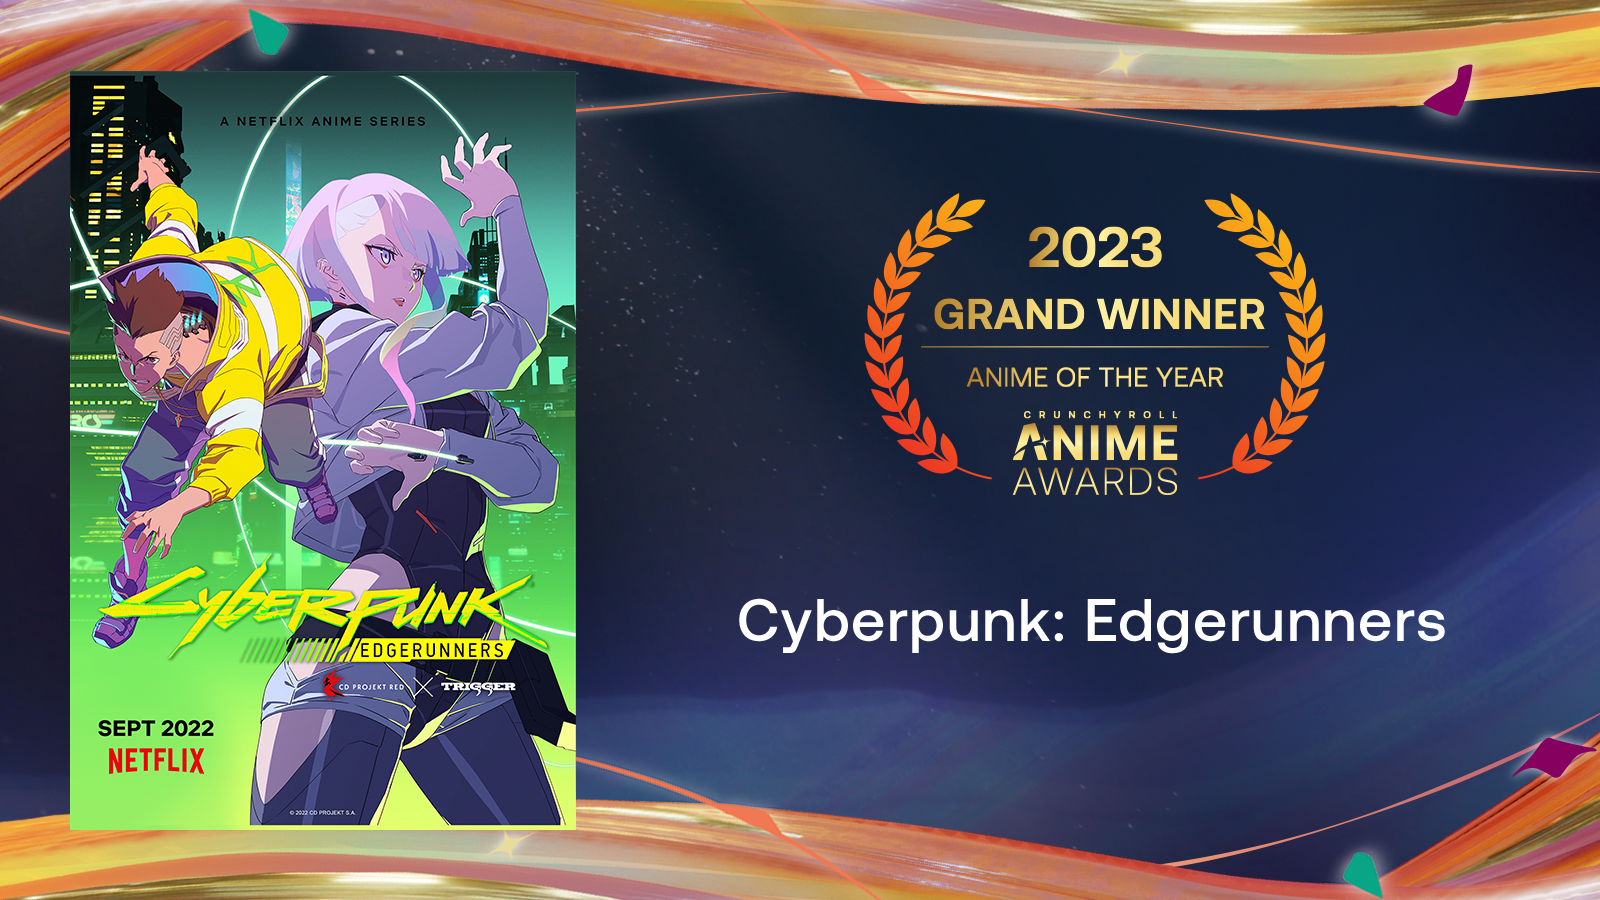 Crunchyroll Anime Awards 2022 Nominees: The Voting Is Now Open!